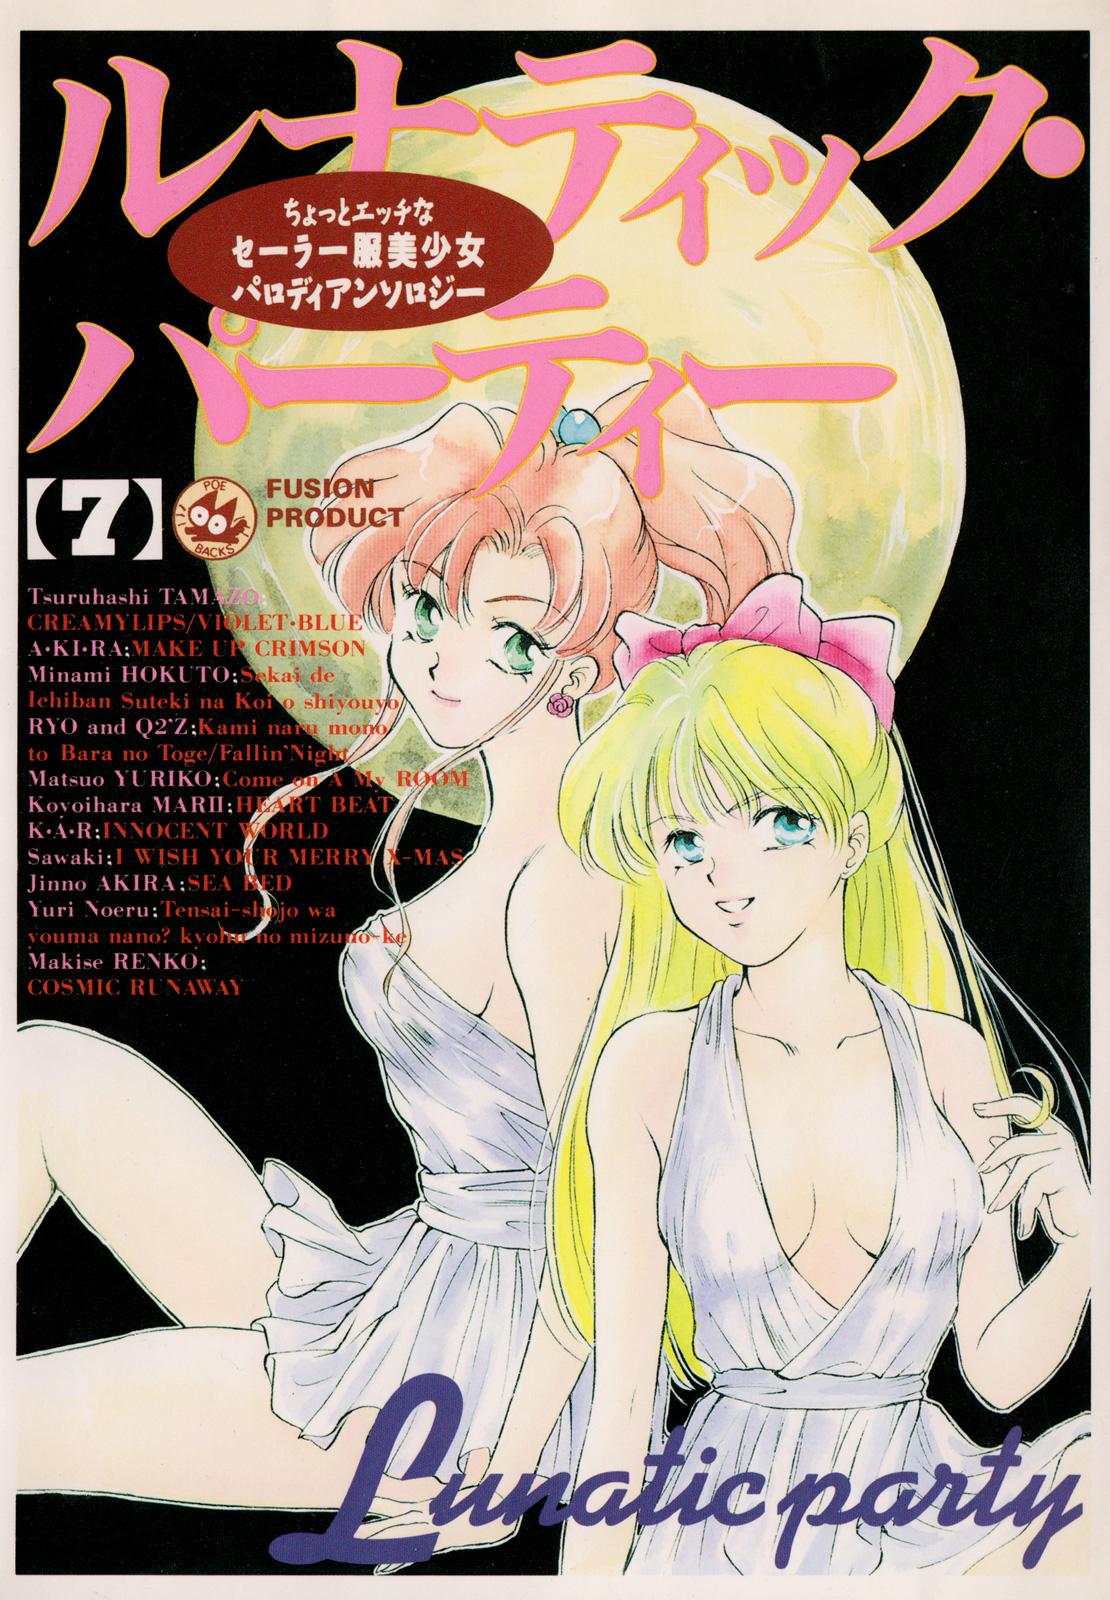 Hard Fucking Lunatic Party 7 - Sailor moon Camwhore - Picture 1